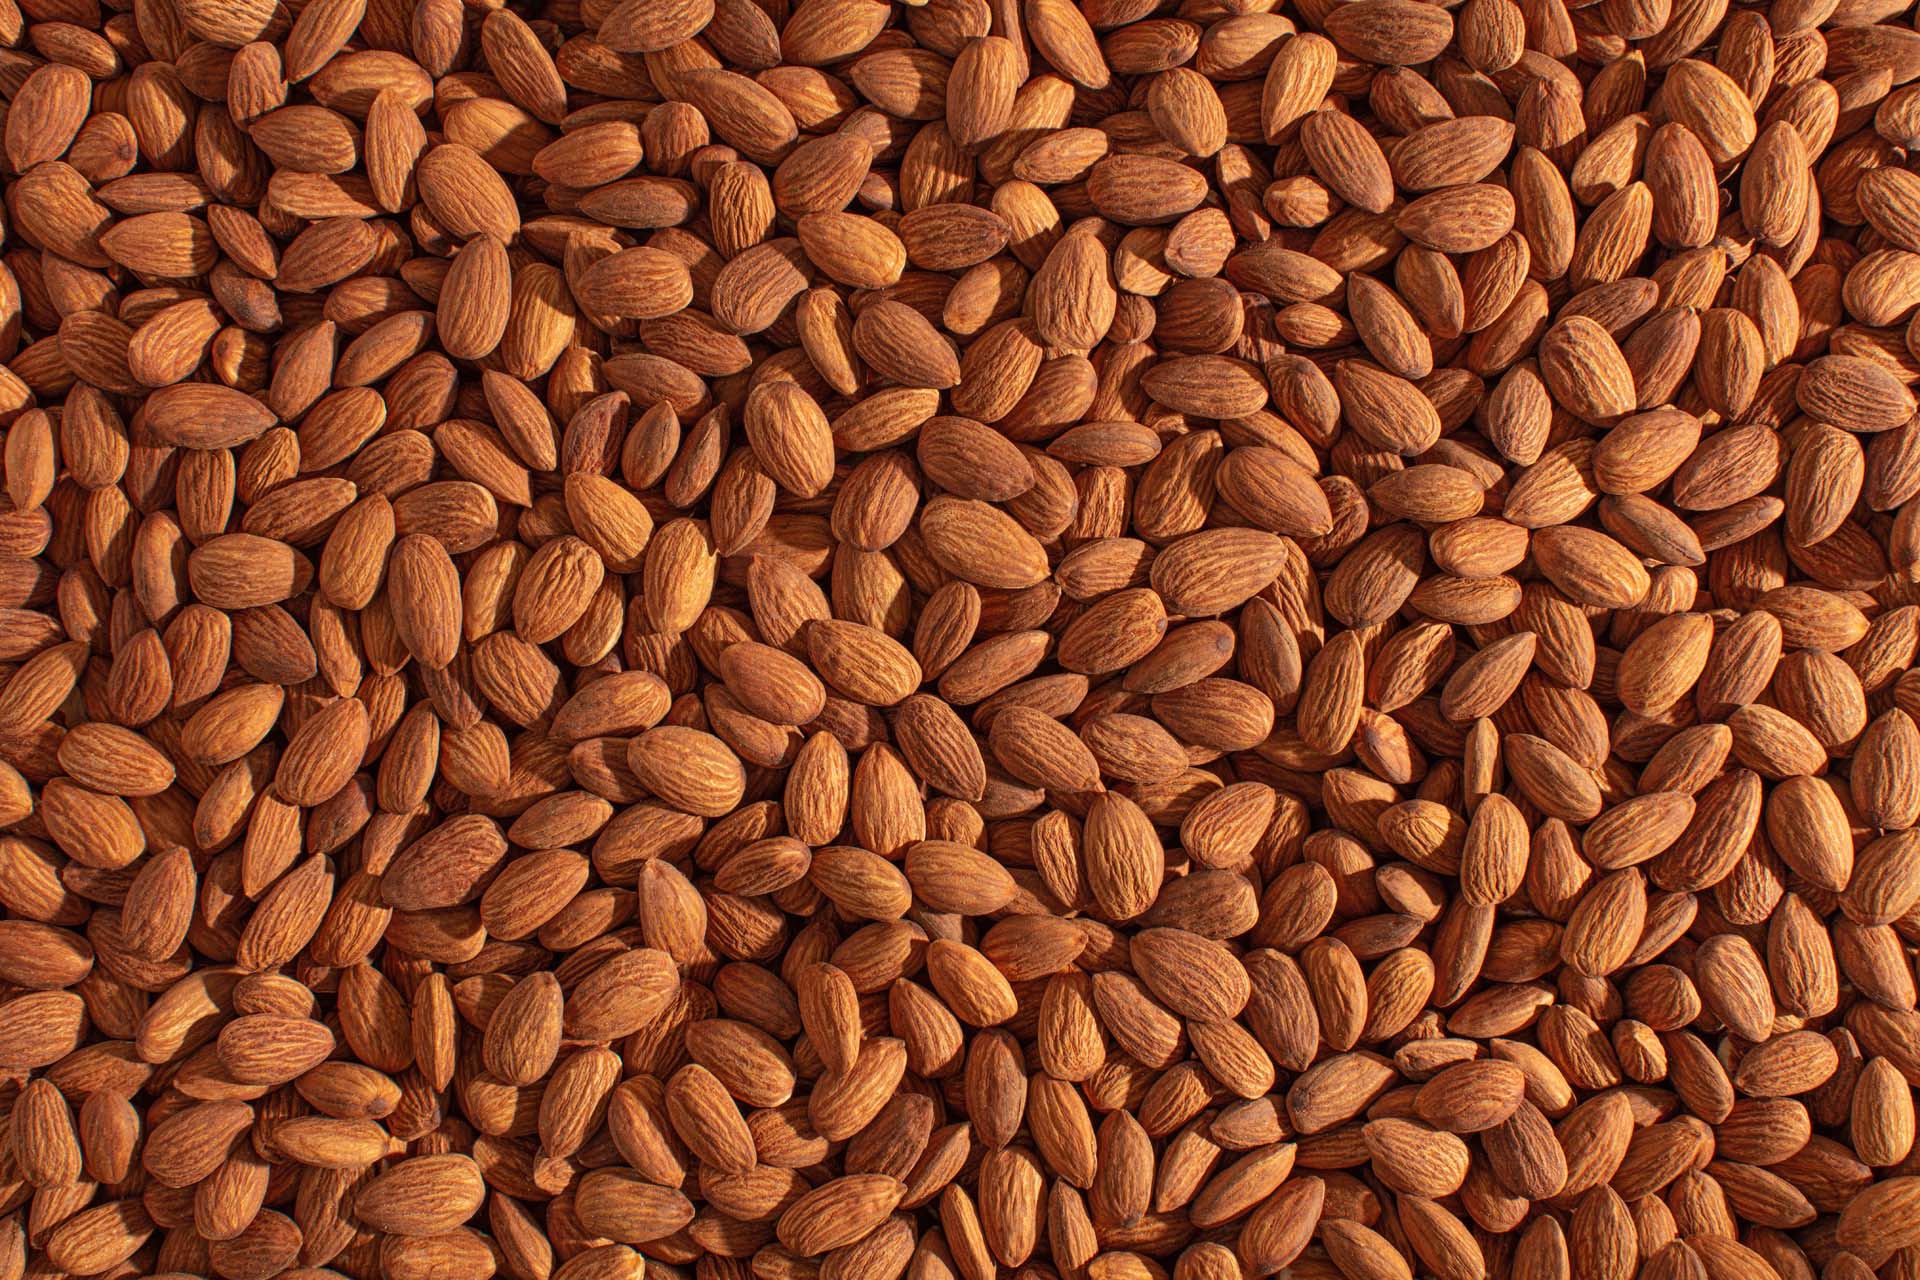 Dry Roasted Natural Whole Almonds